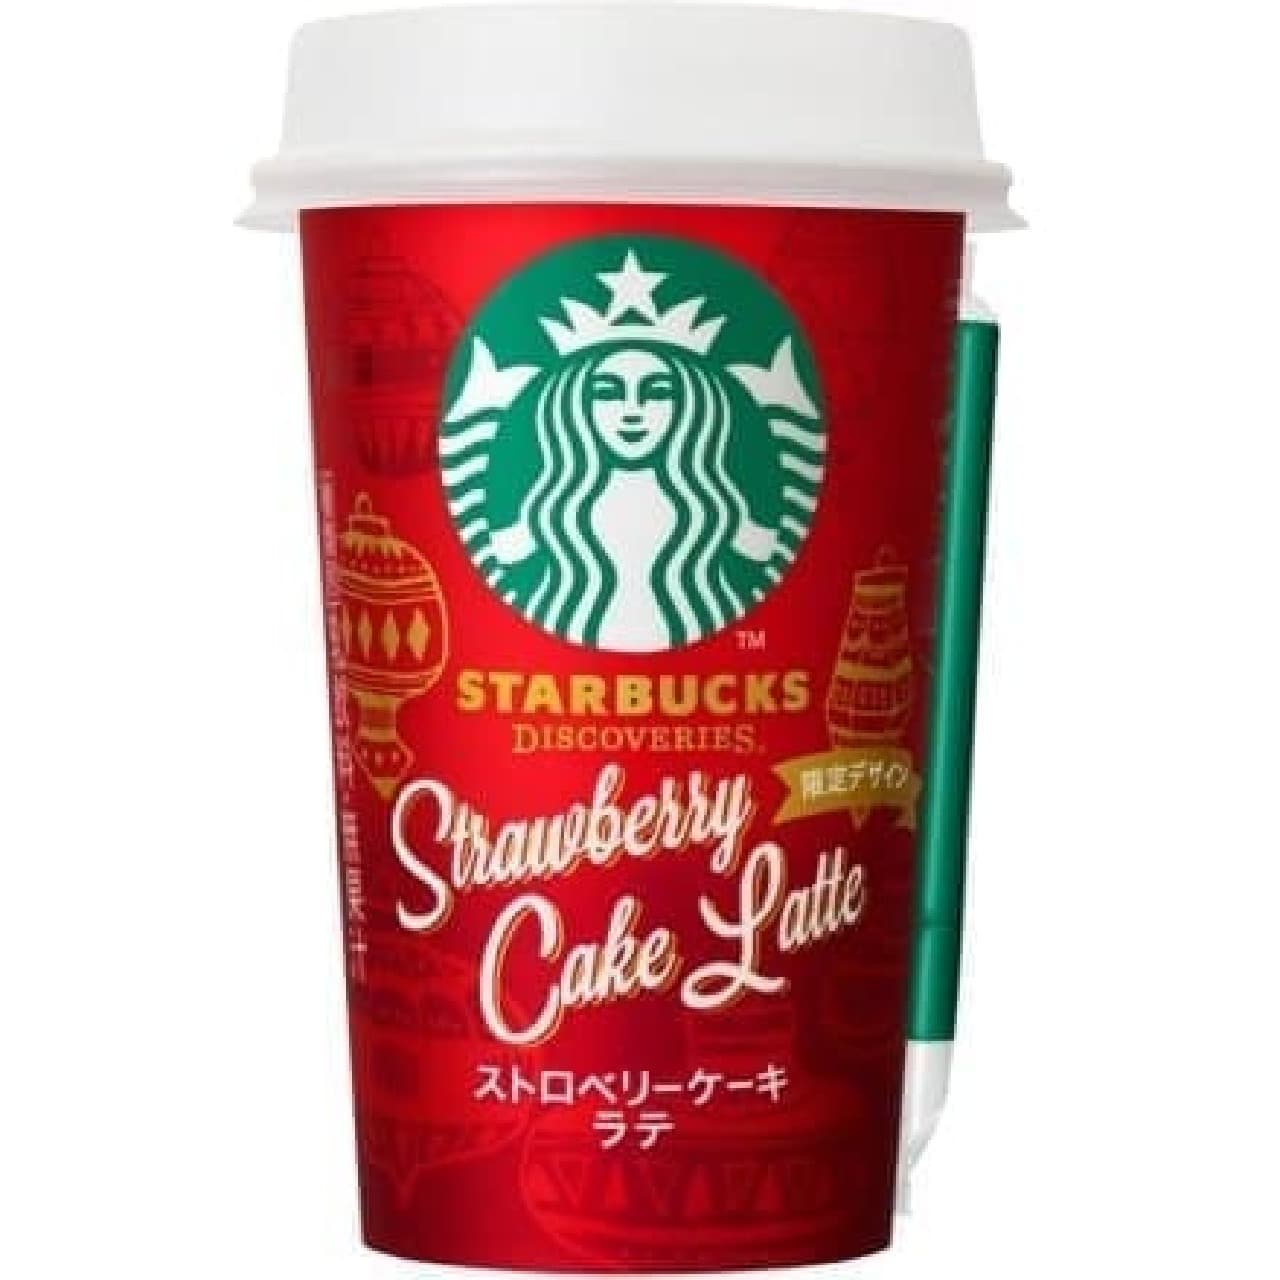 In the popular red cup during the holiday season